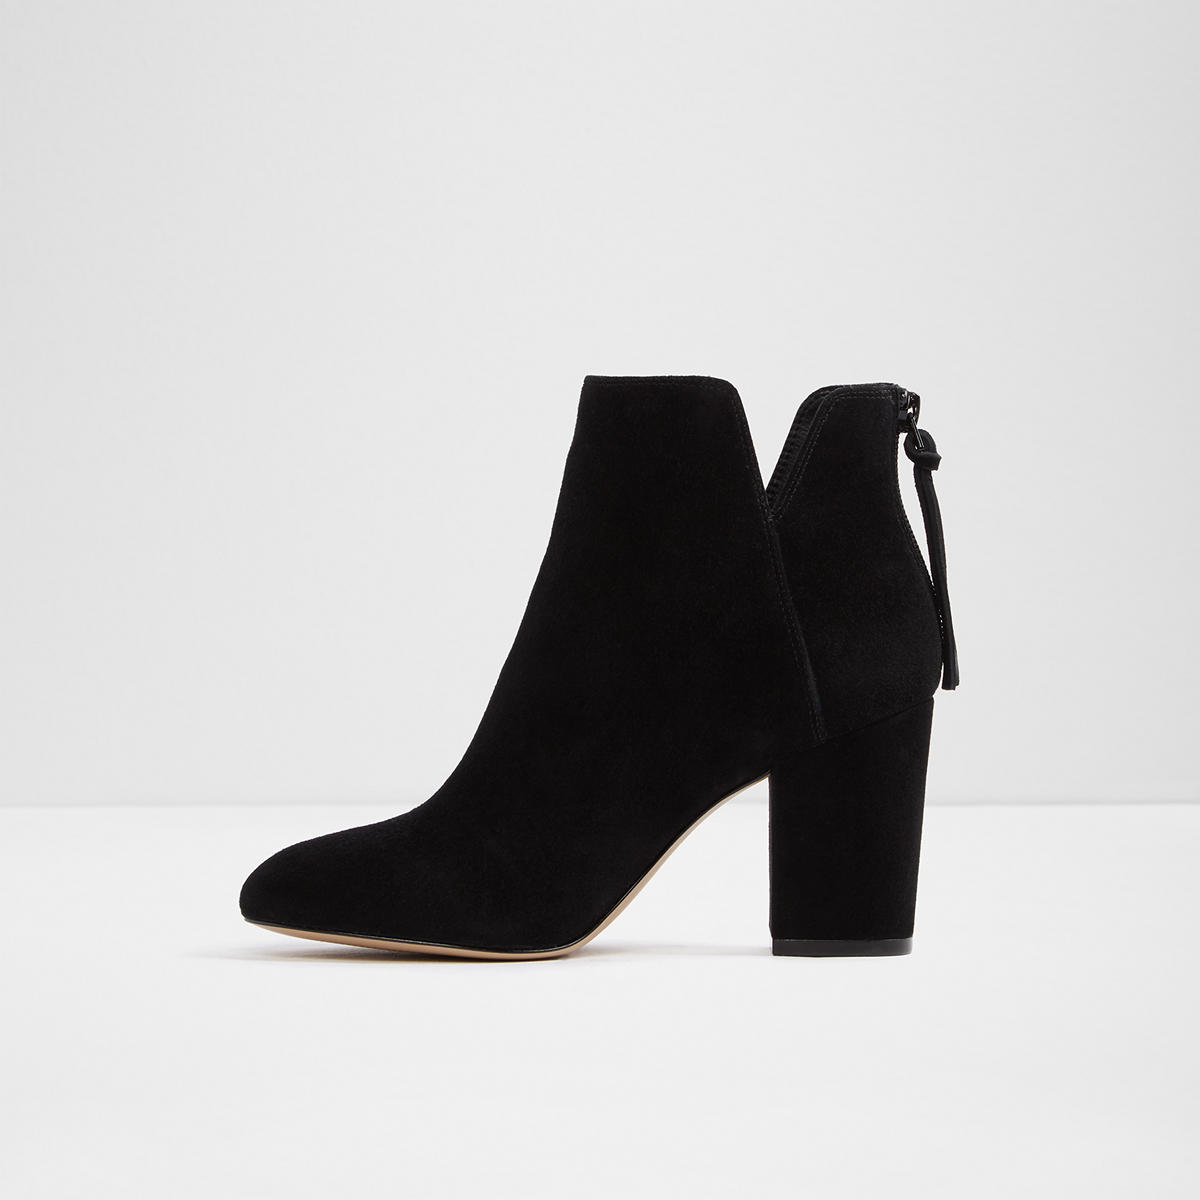 Dominicaa Black Other Women's Ankle boots | Aldoshoes.com US